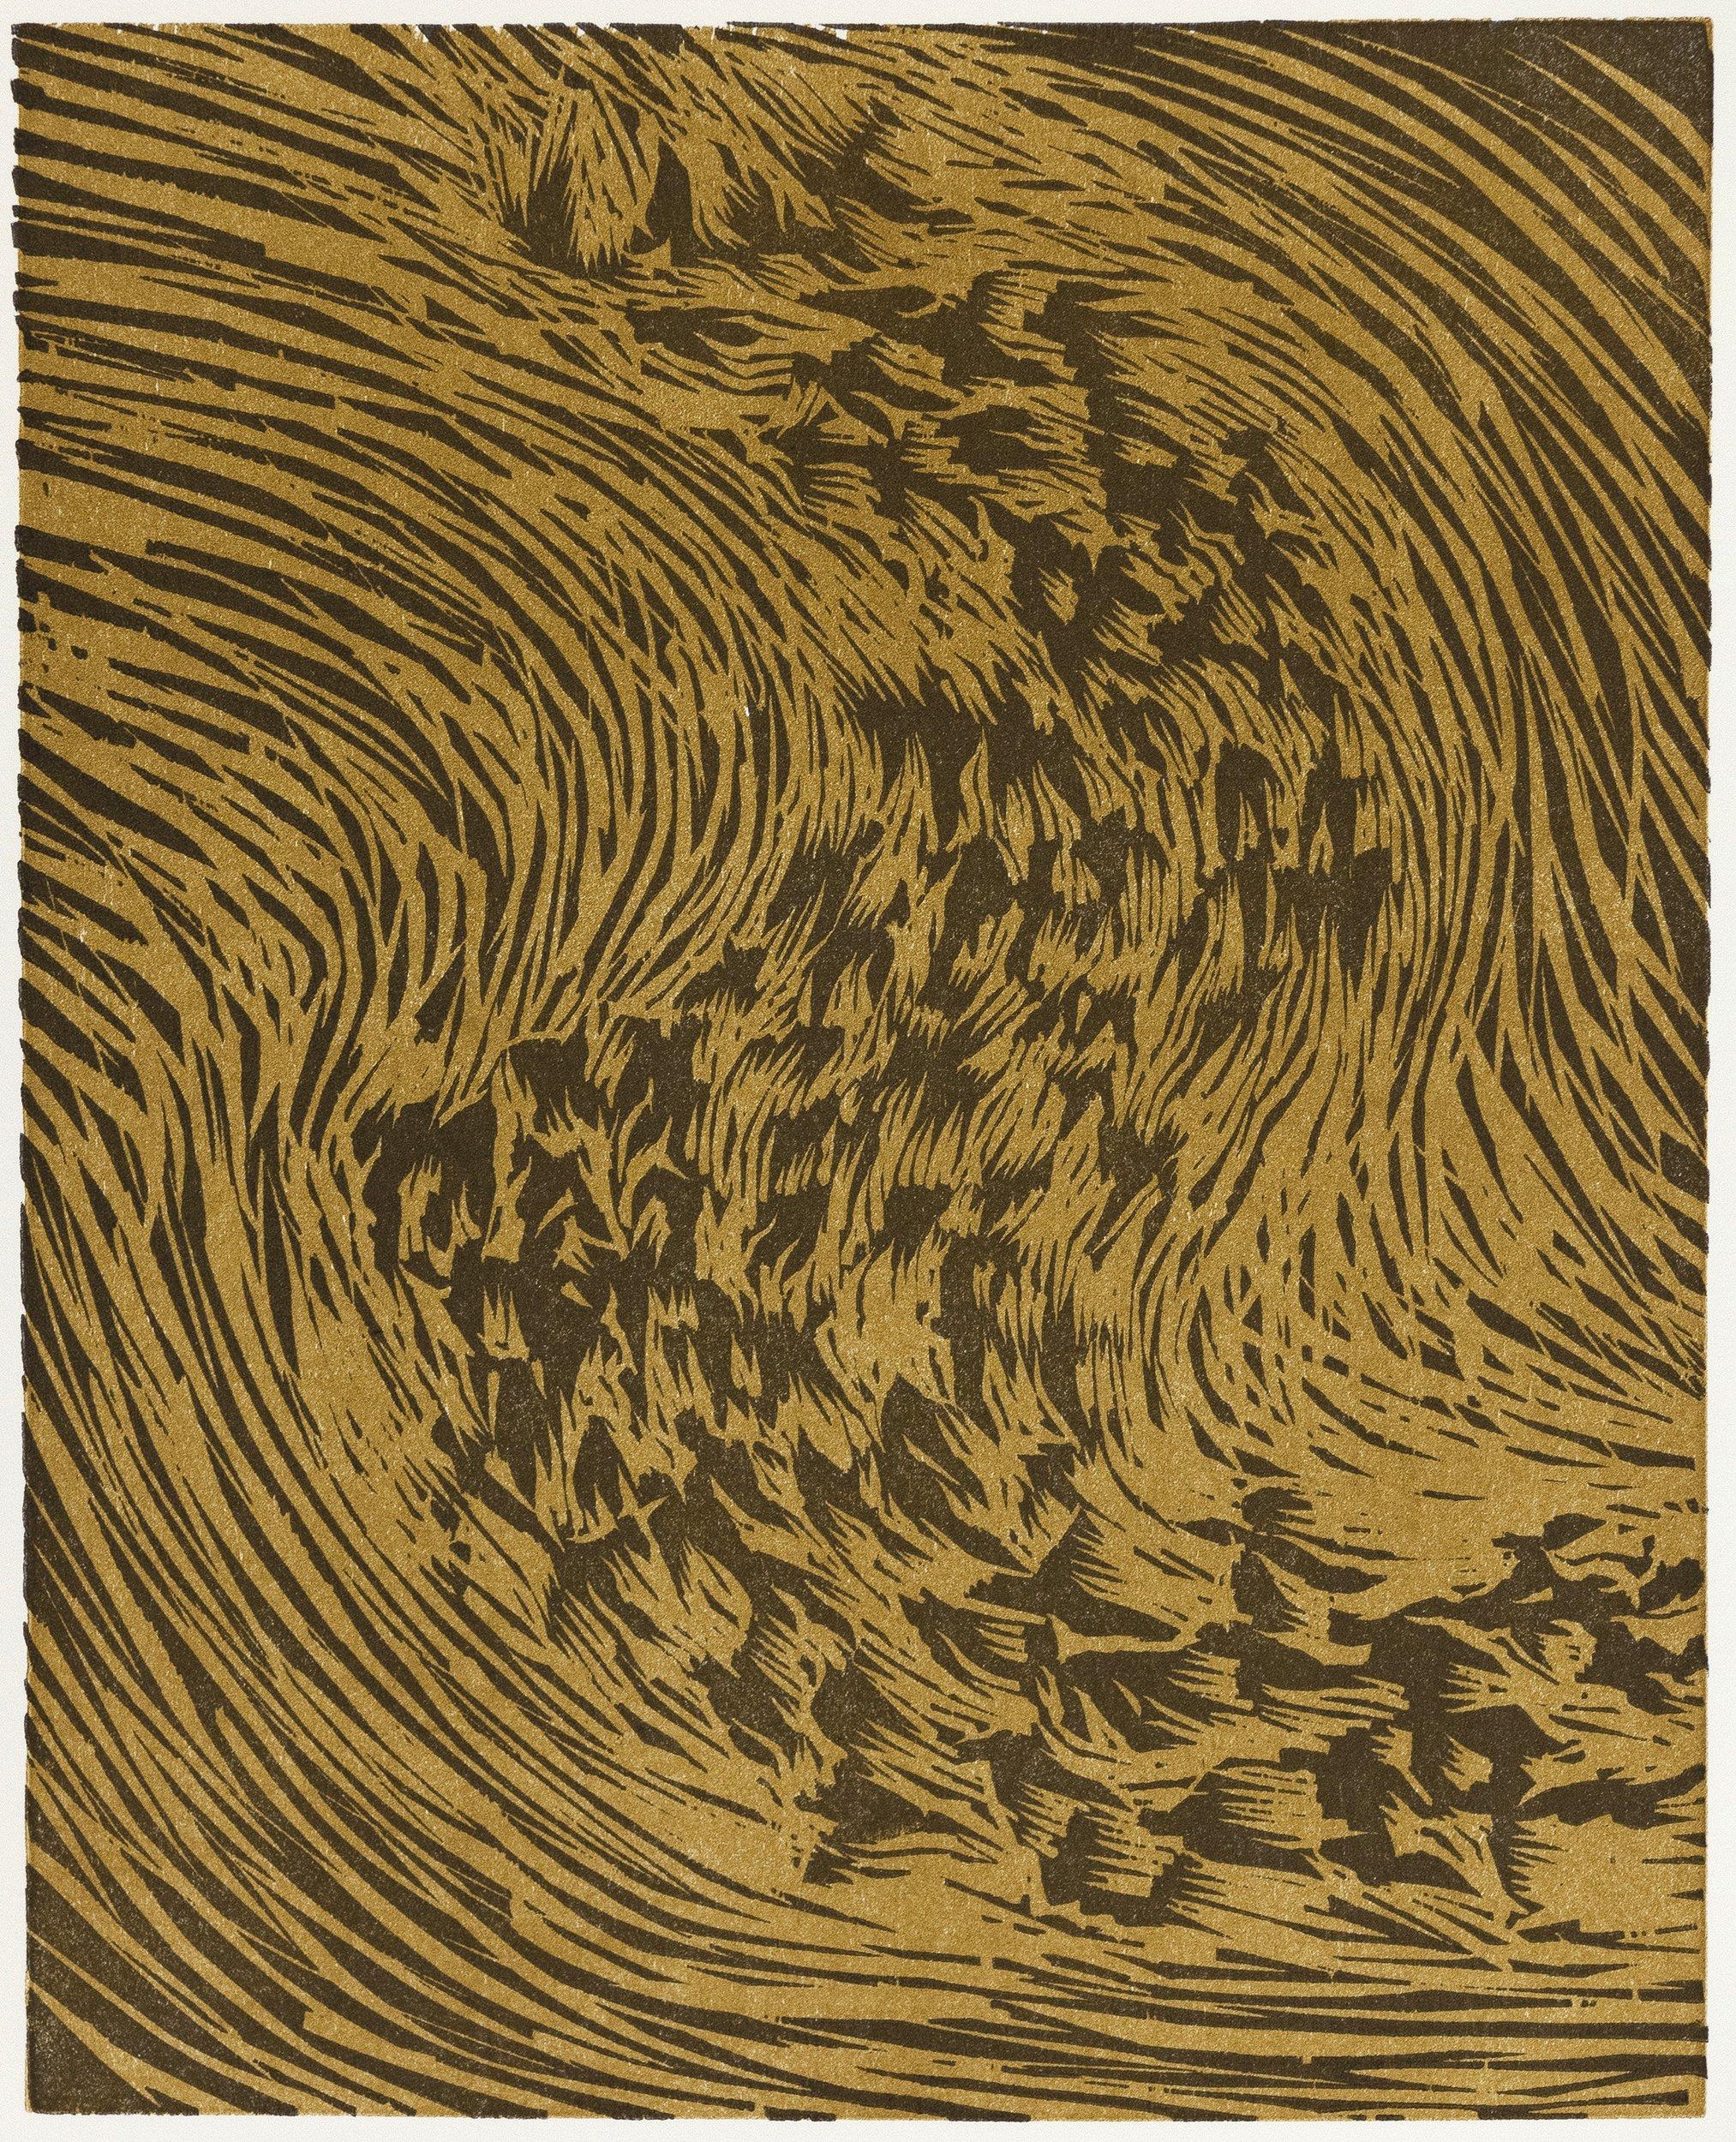 Starling (From artist book A Bestiary by Bradford Morrow)  - Print by James Nares